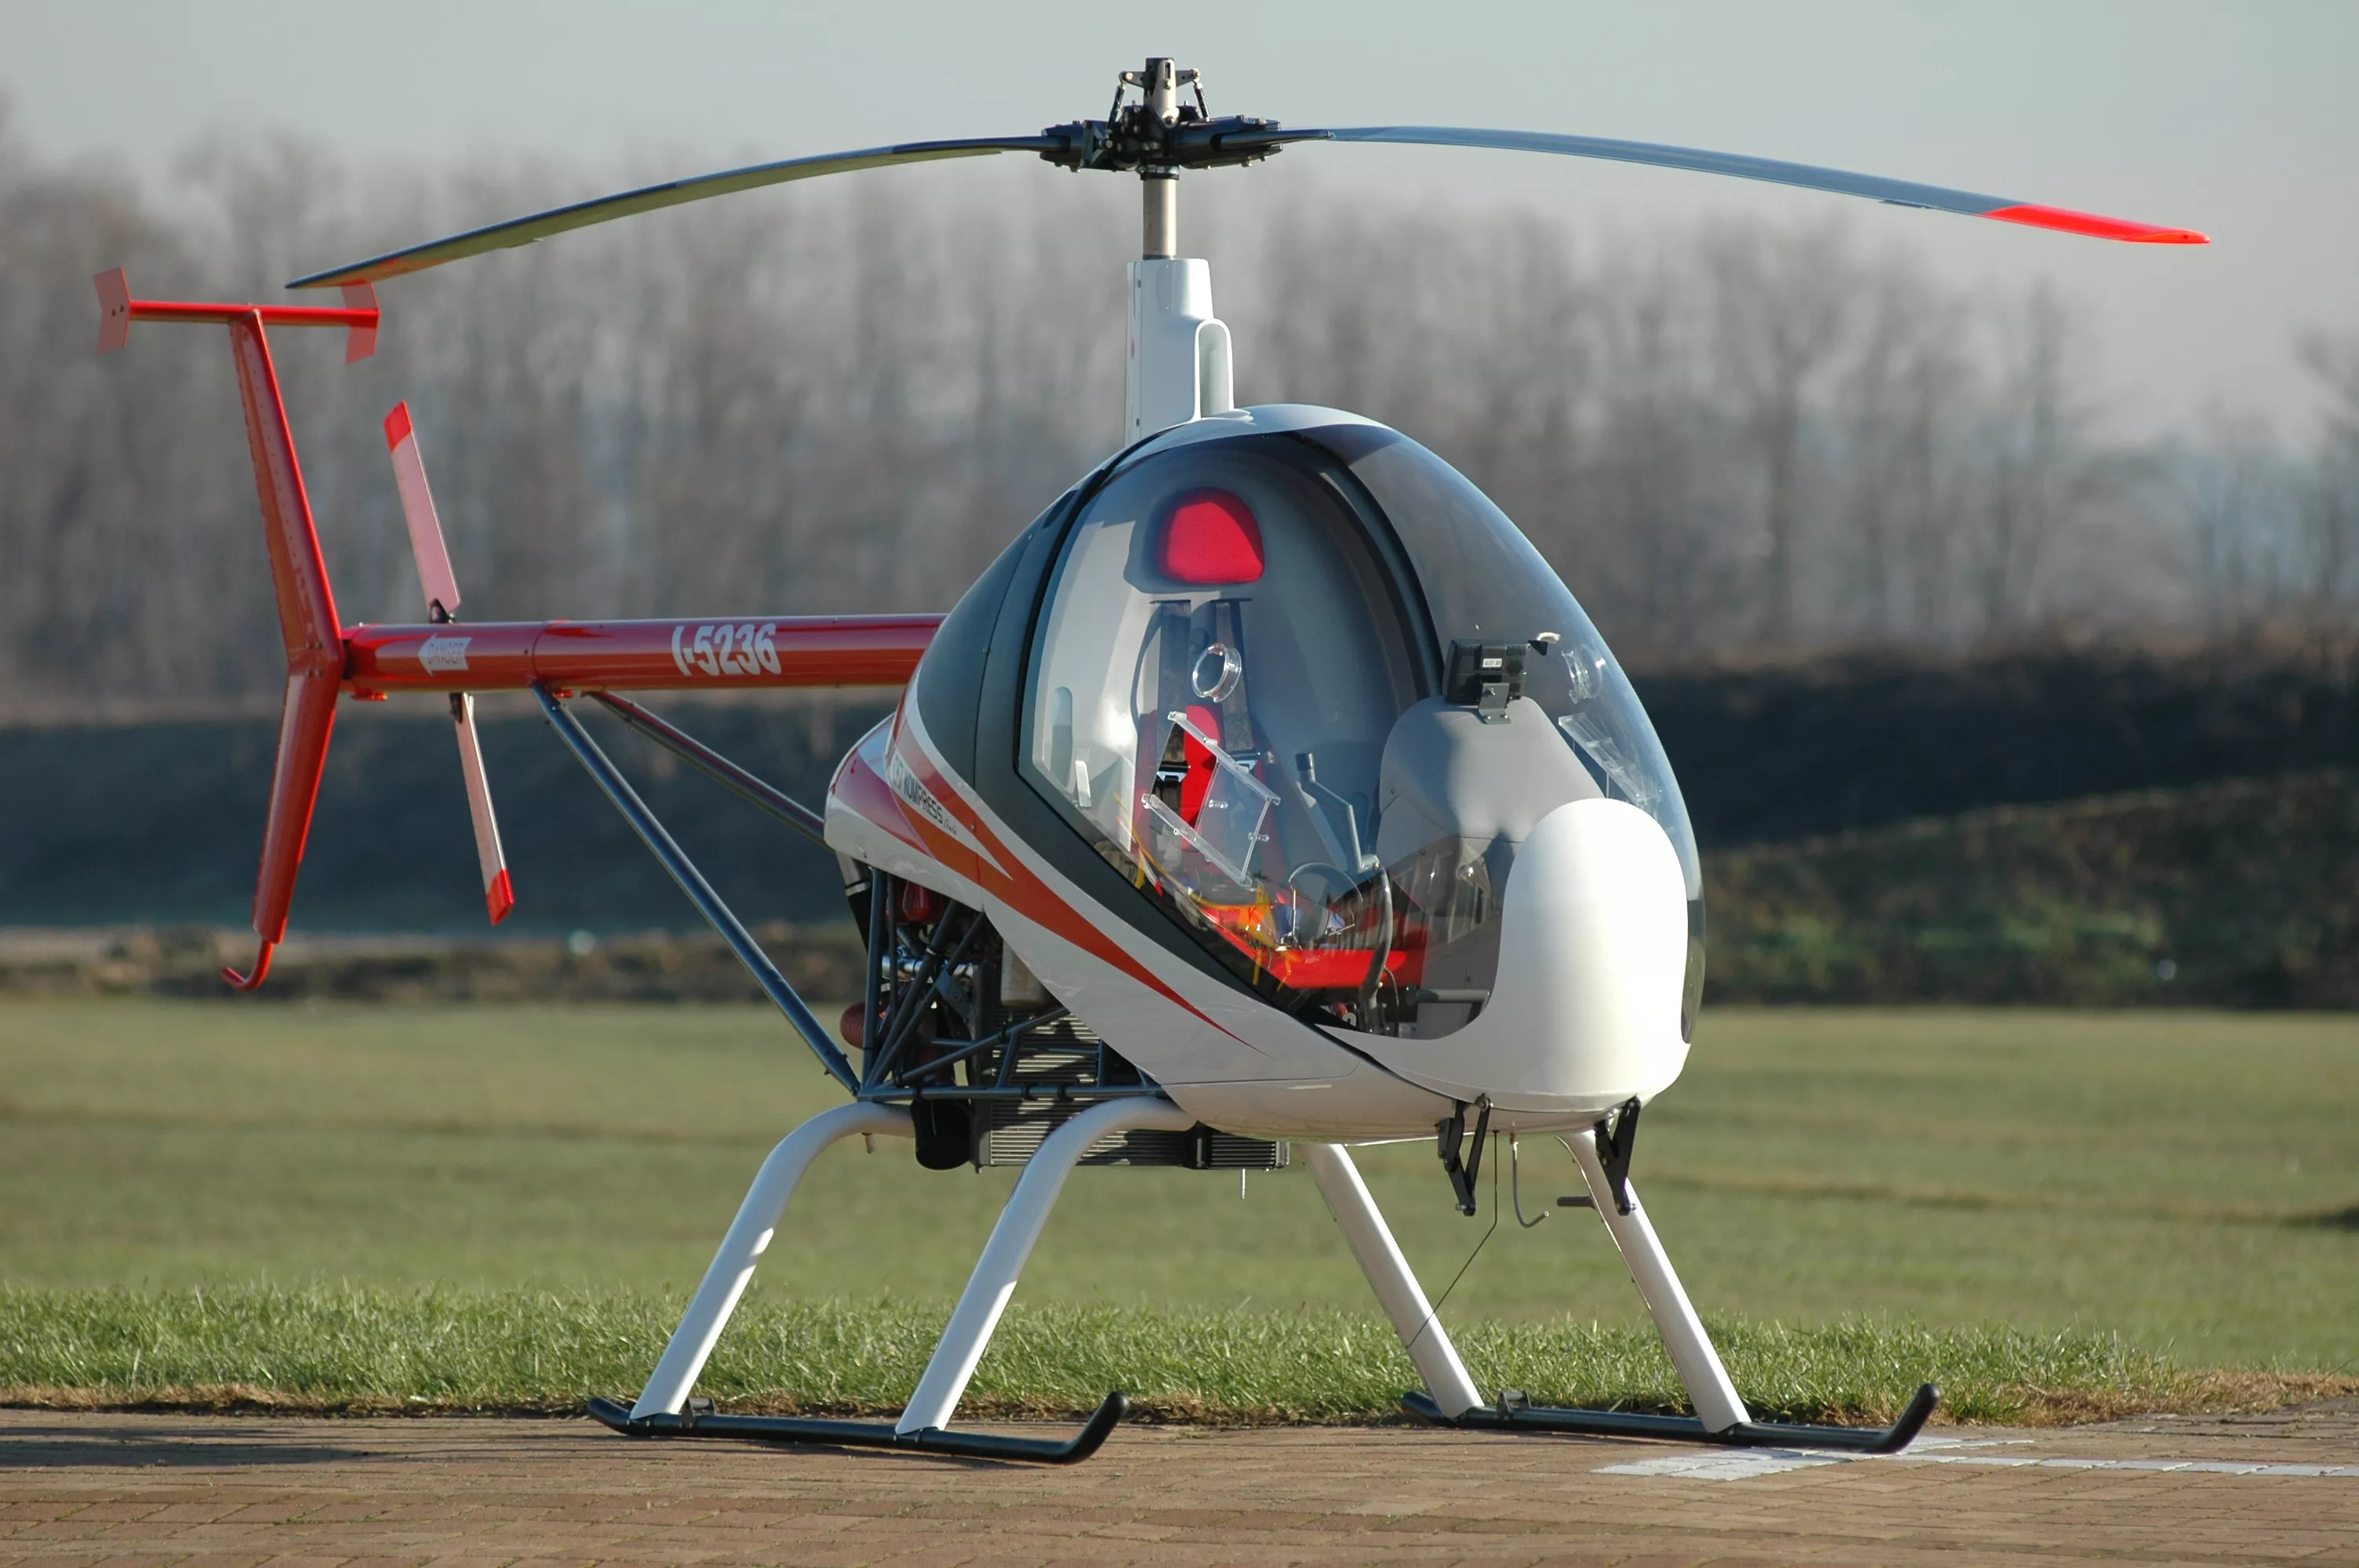 Accretion Aviation in India, Central Asia | Helicopter Sport - Rated 1